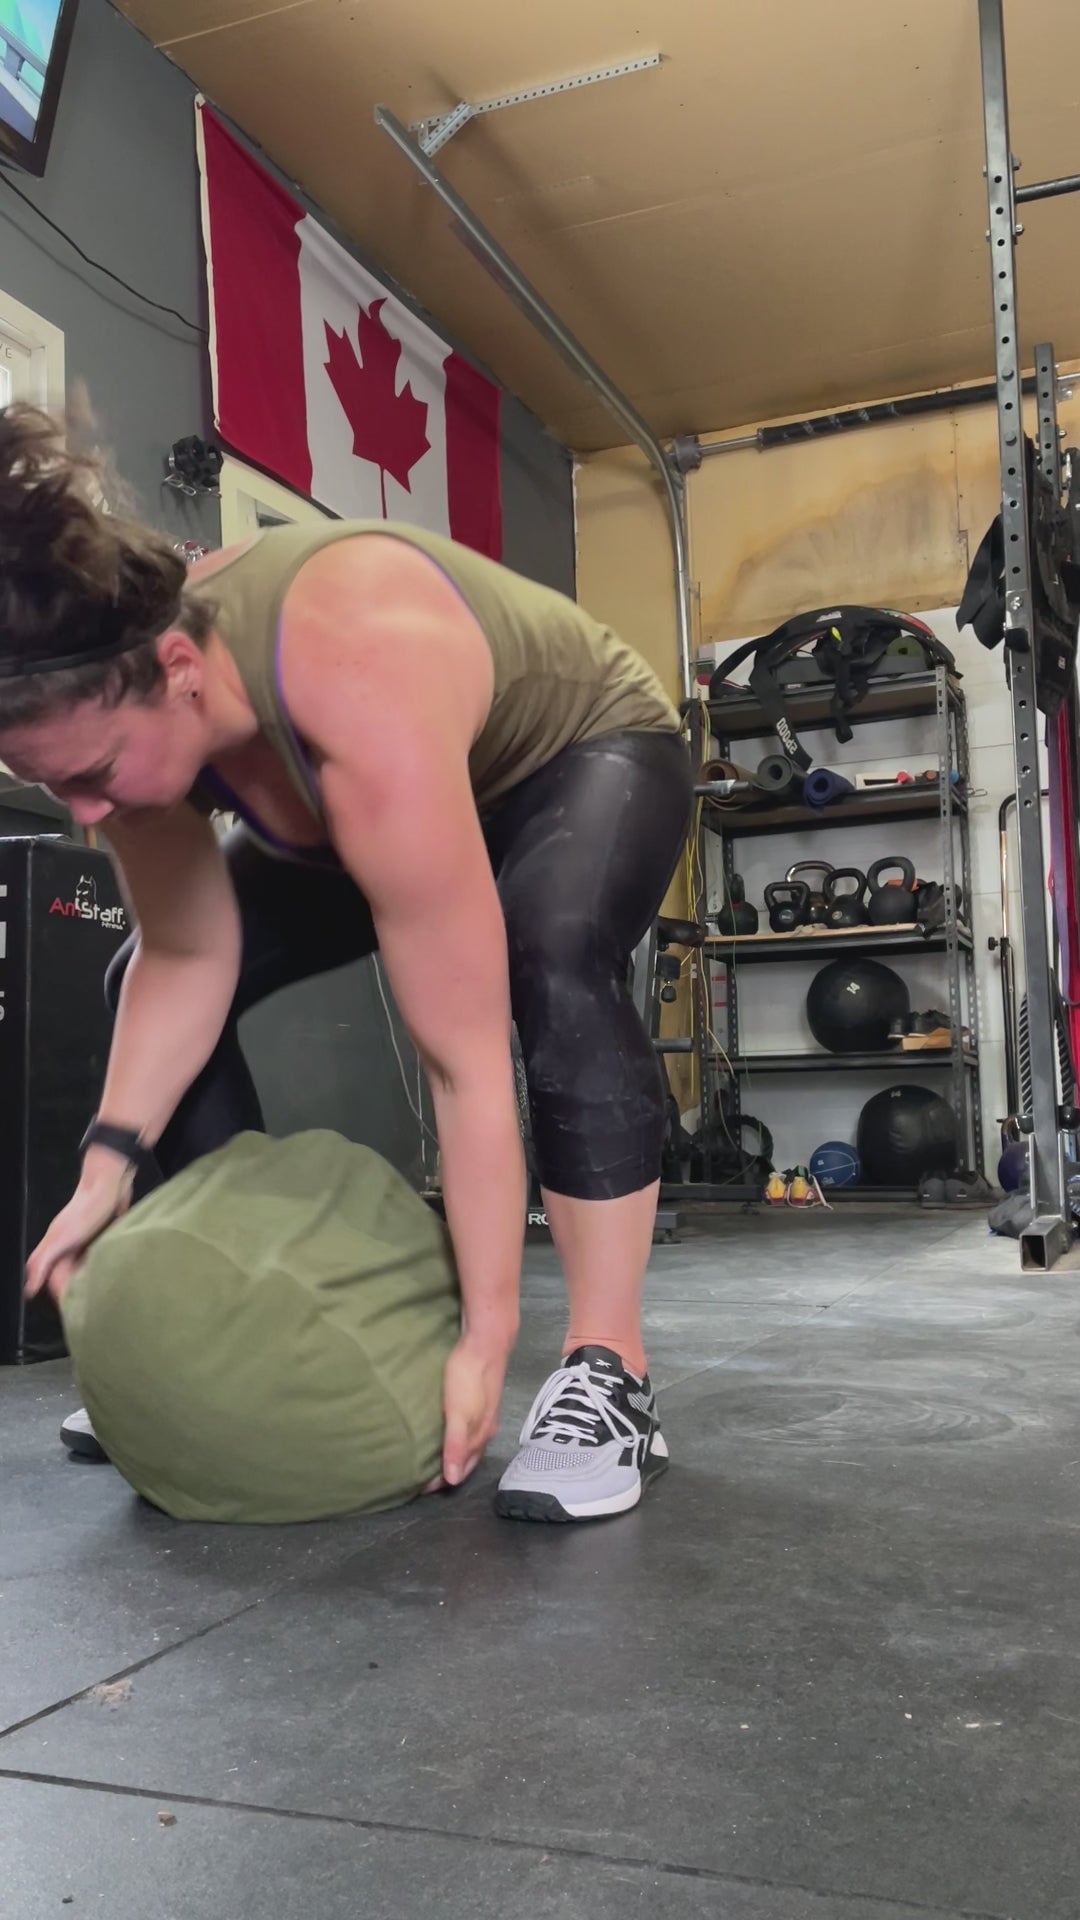 Female is tossing a 100lb Sandbag over her shoulder and throwing it behind her